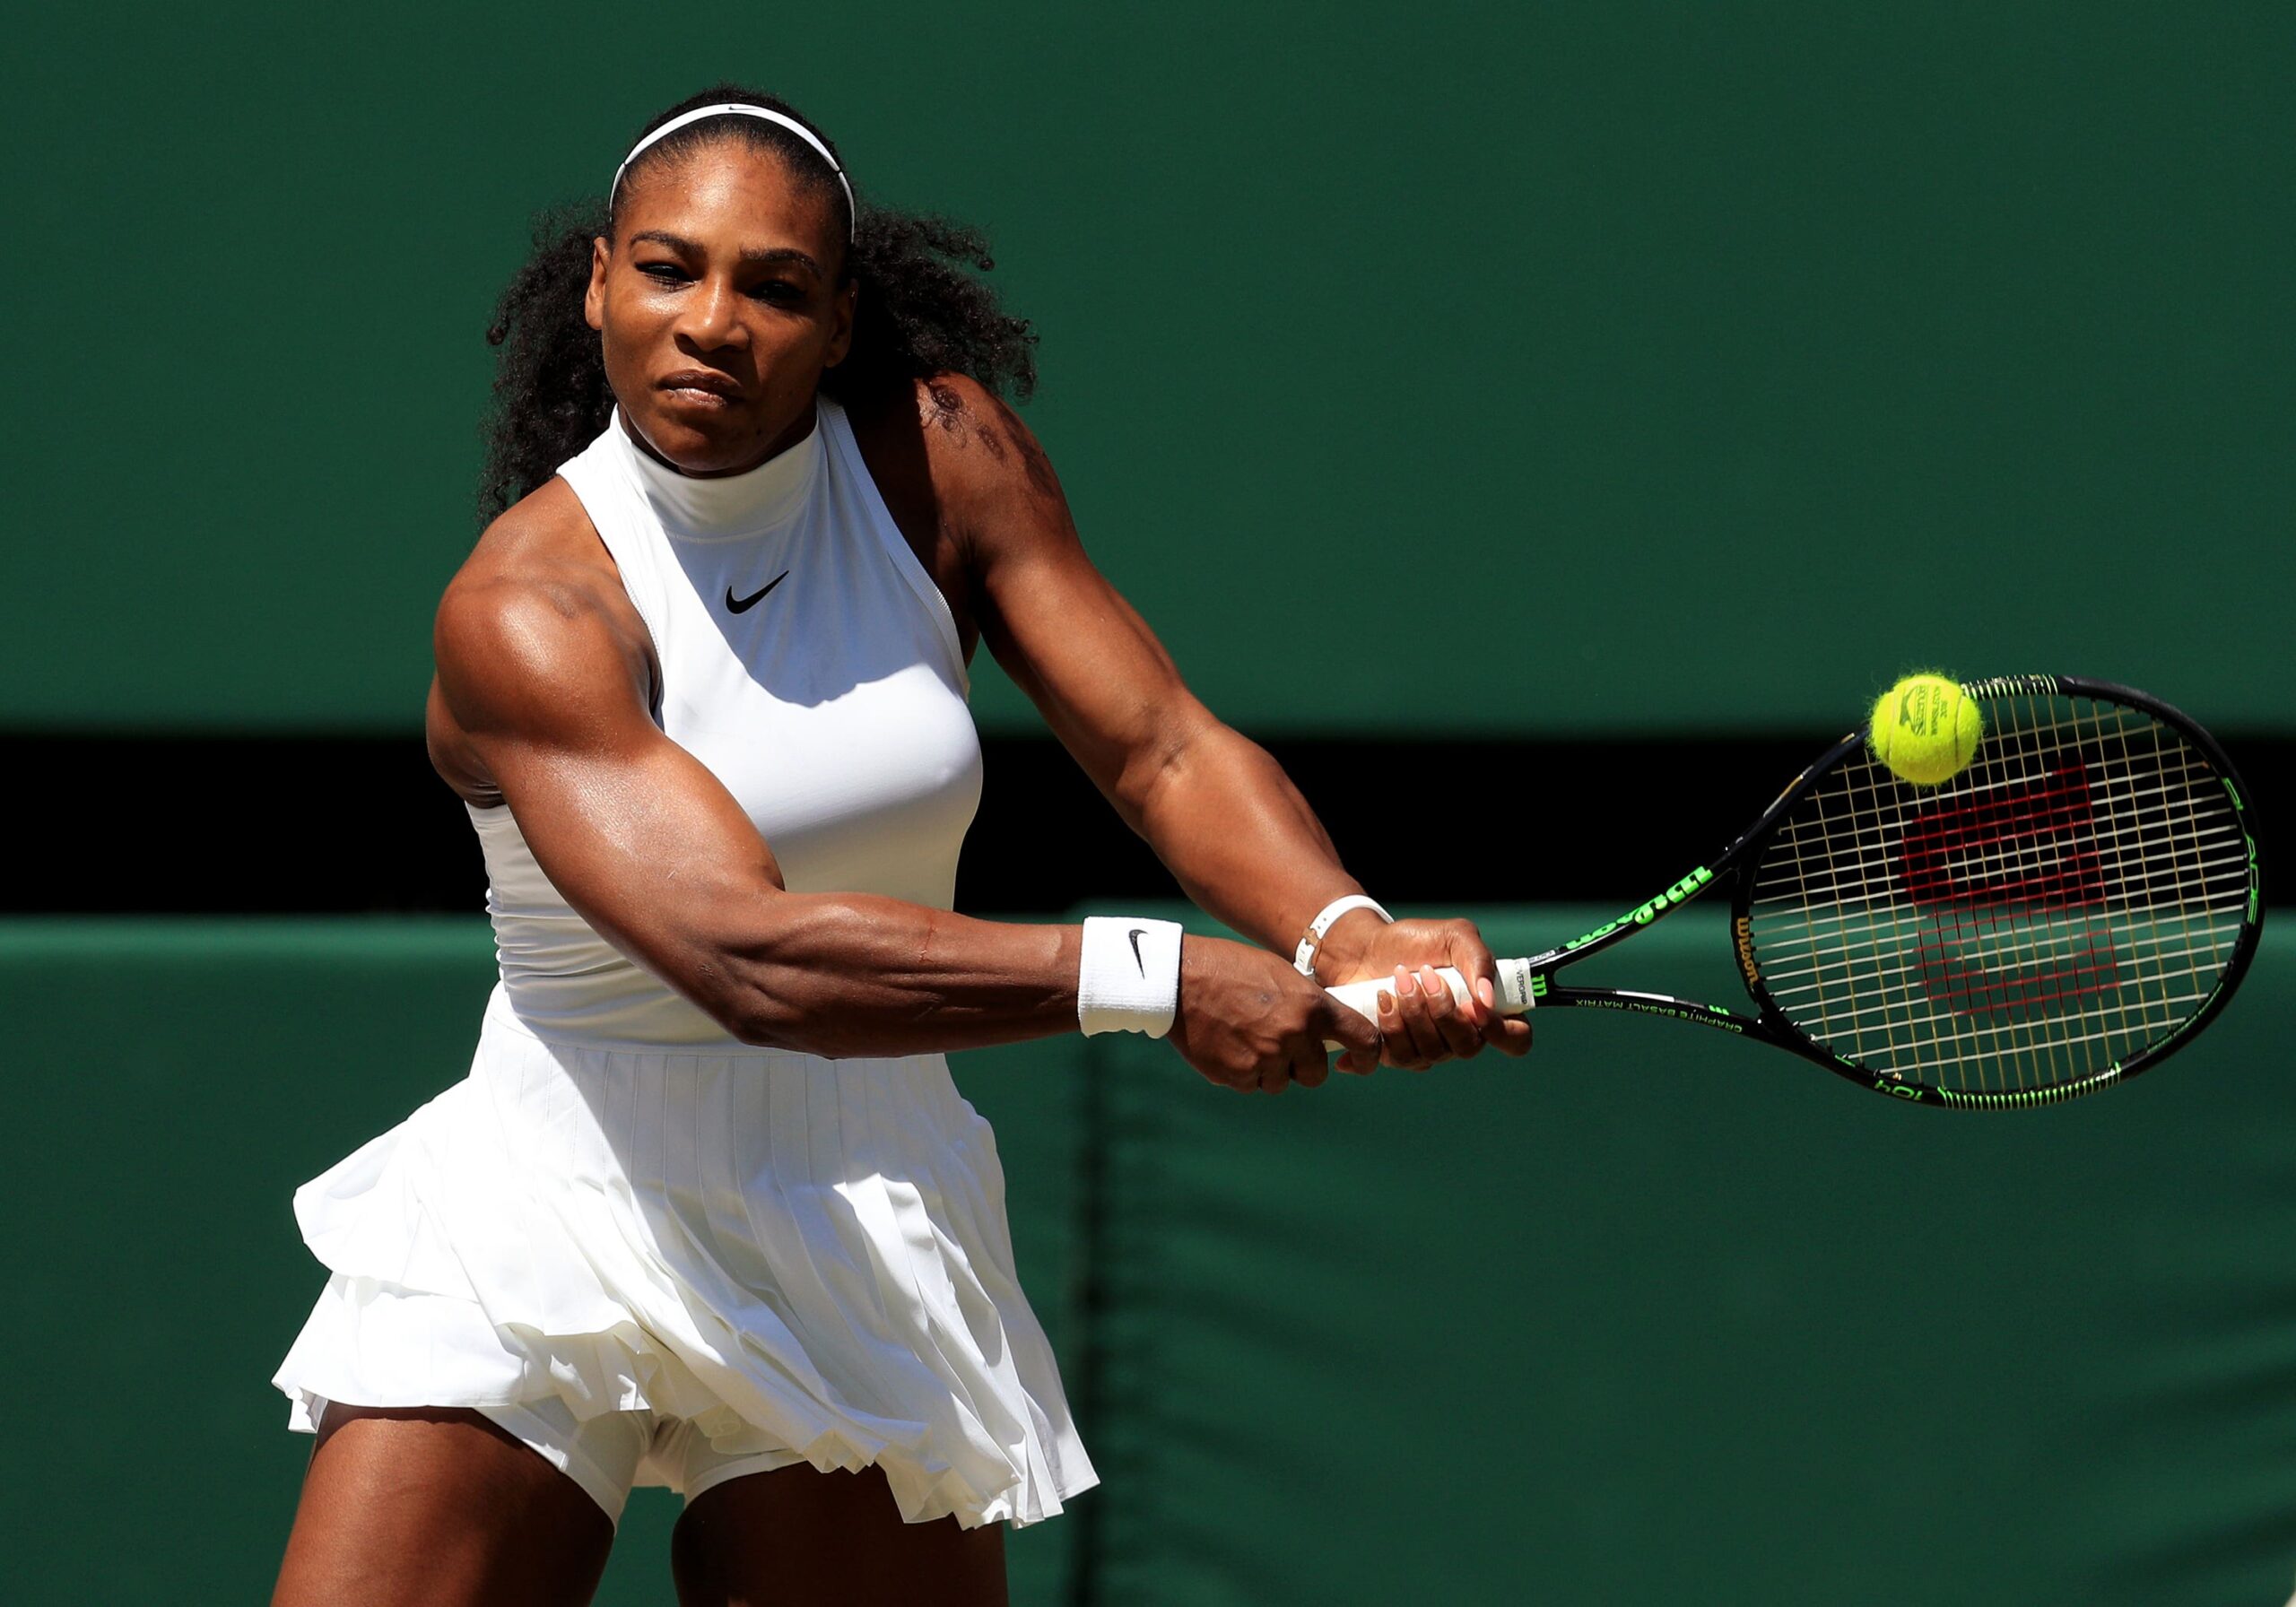 Serena Williams And Other Top Athletes Are Vegan – So Can A Plant-Based Diet Give You The Edge?